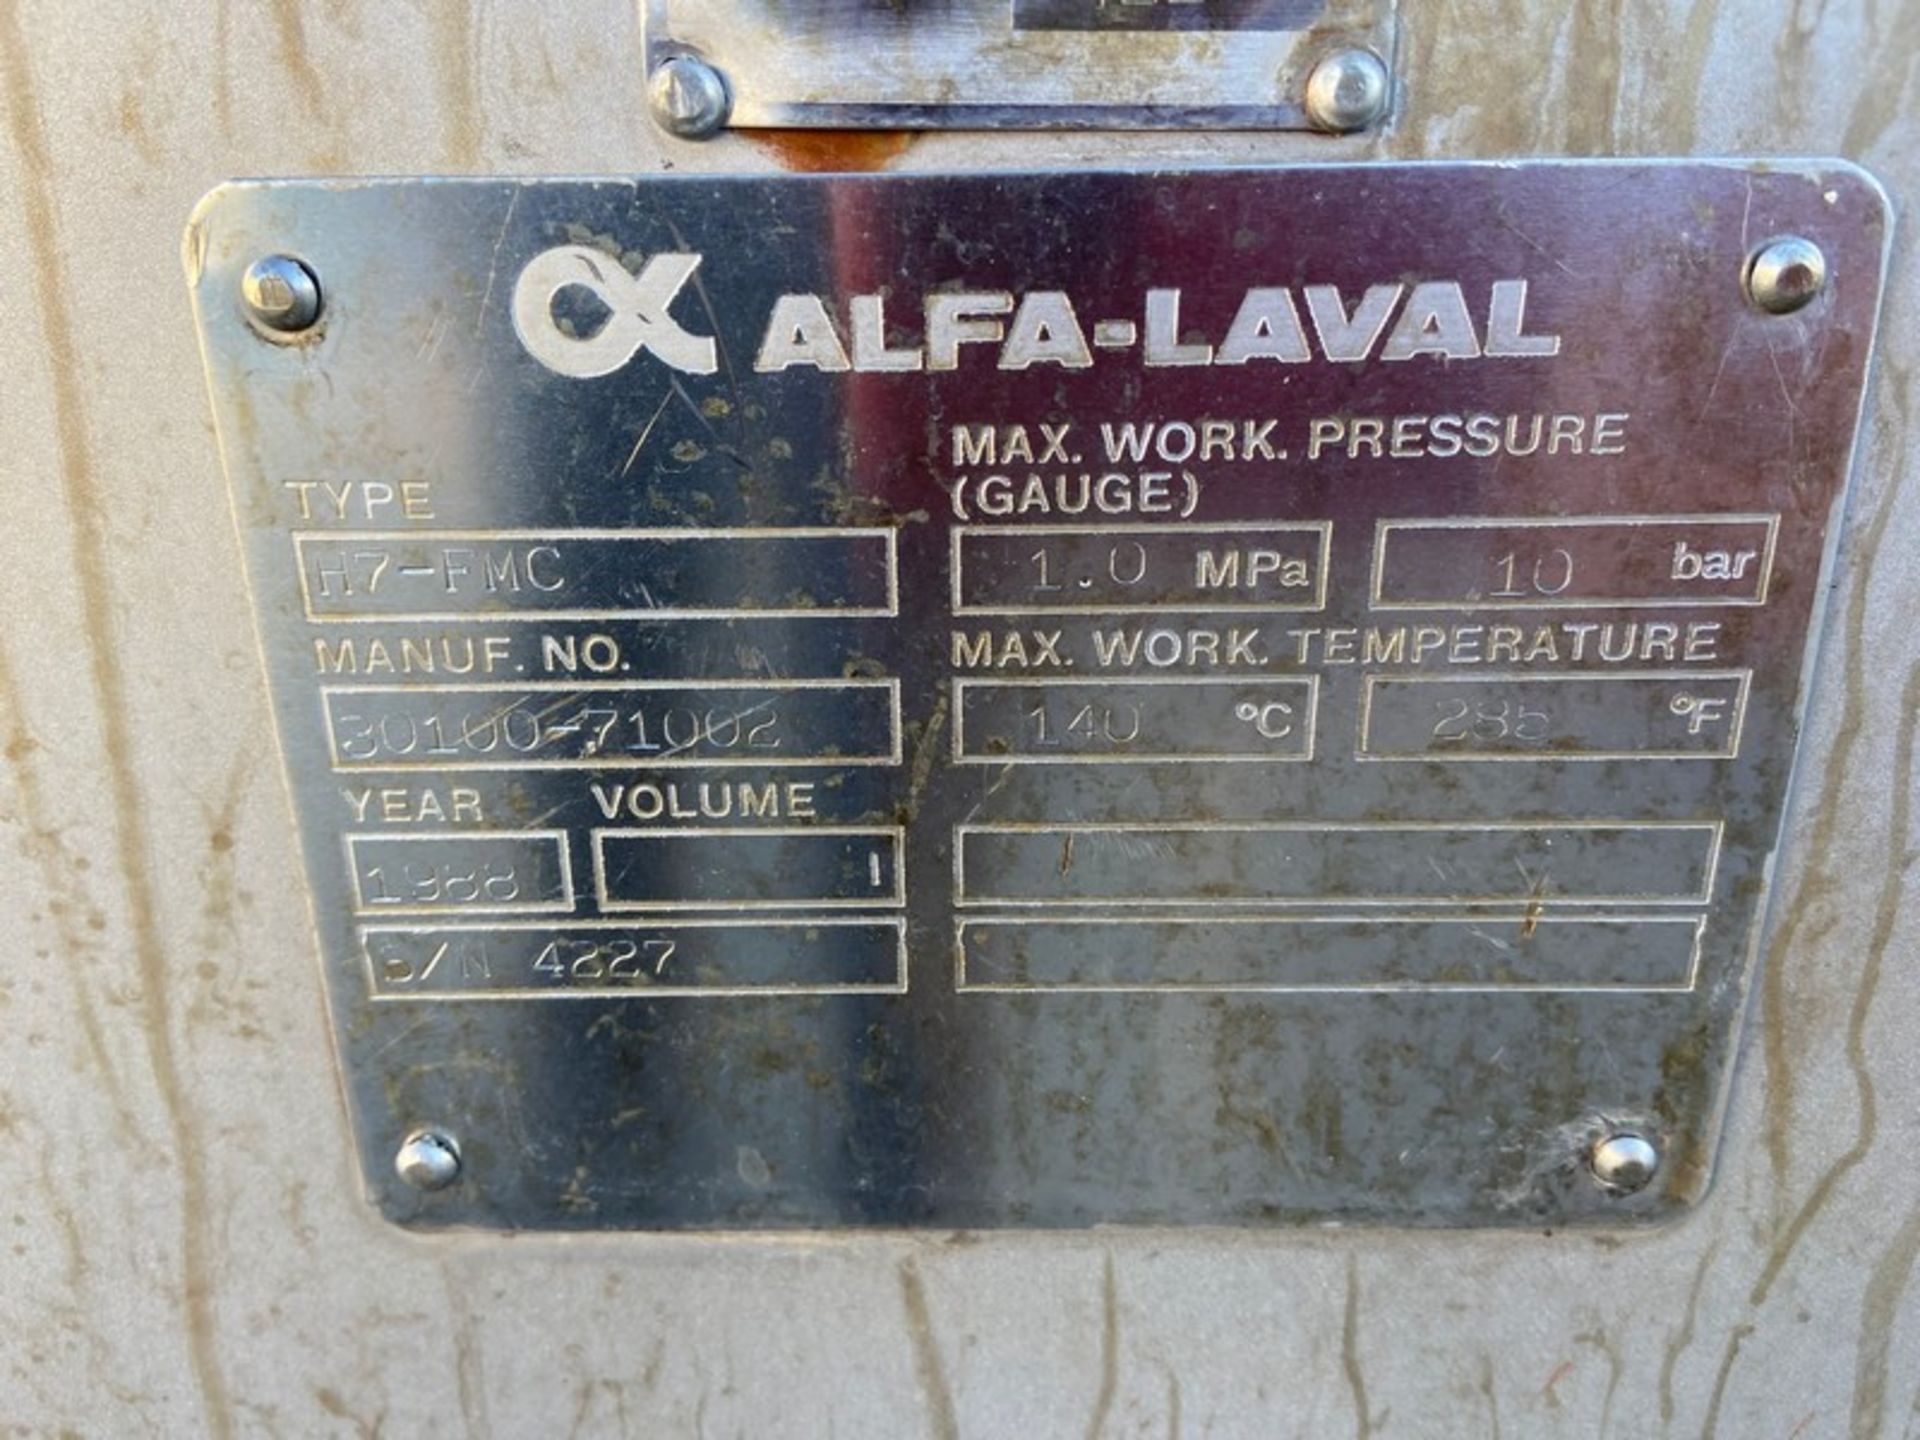 Alfa-Laval 4-Section Plate Press Heat Exchanger, Type H7-FMC, S/N 4227, Max. Work Pressure 1.0 - Image 5 of 6